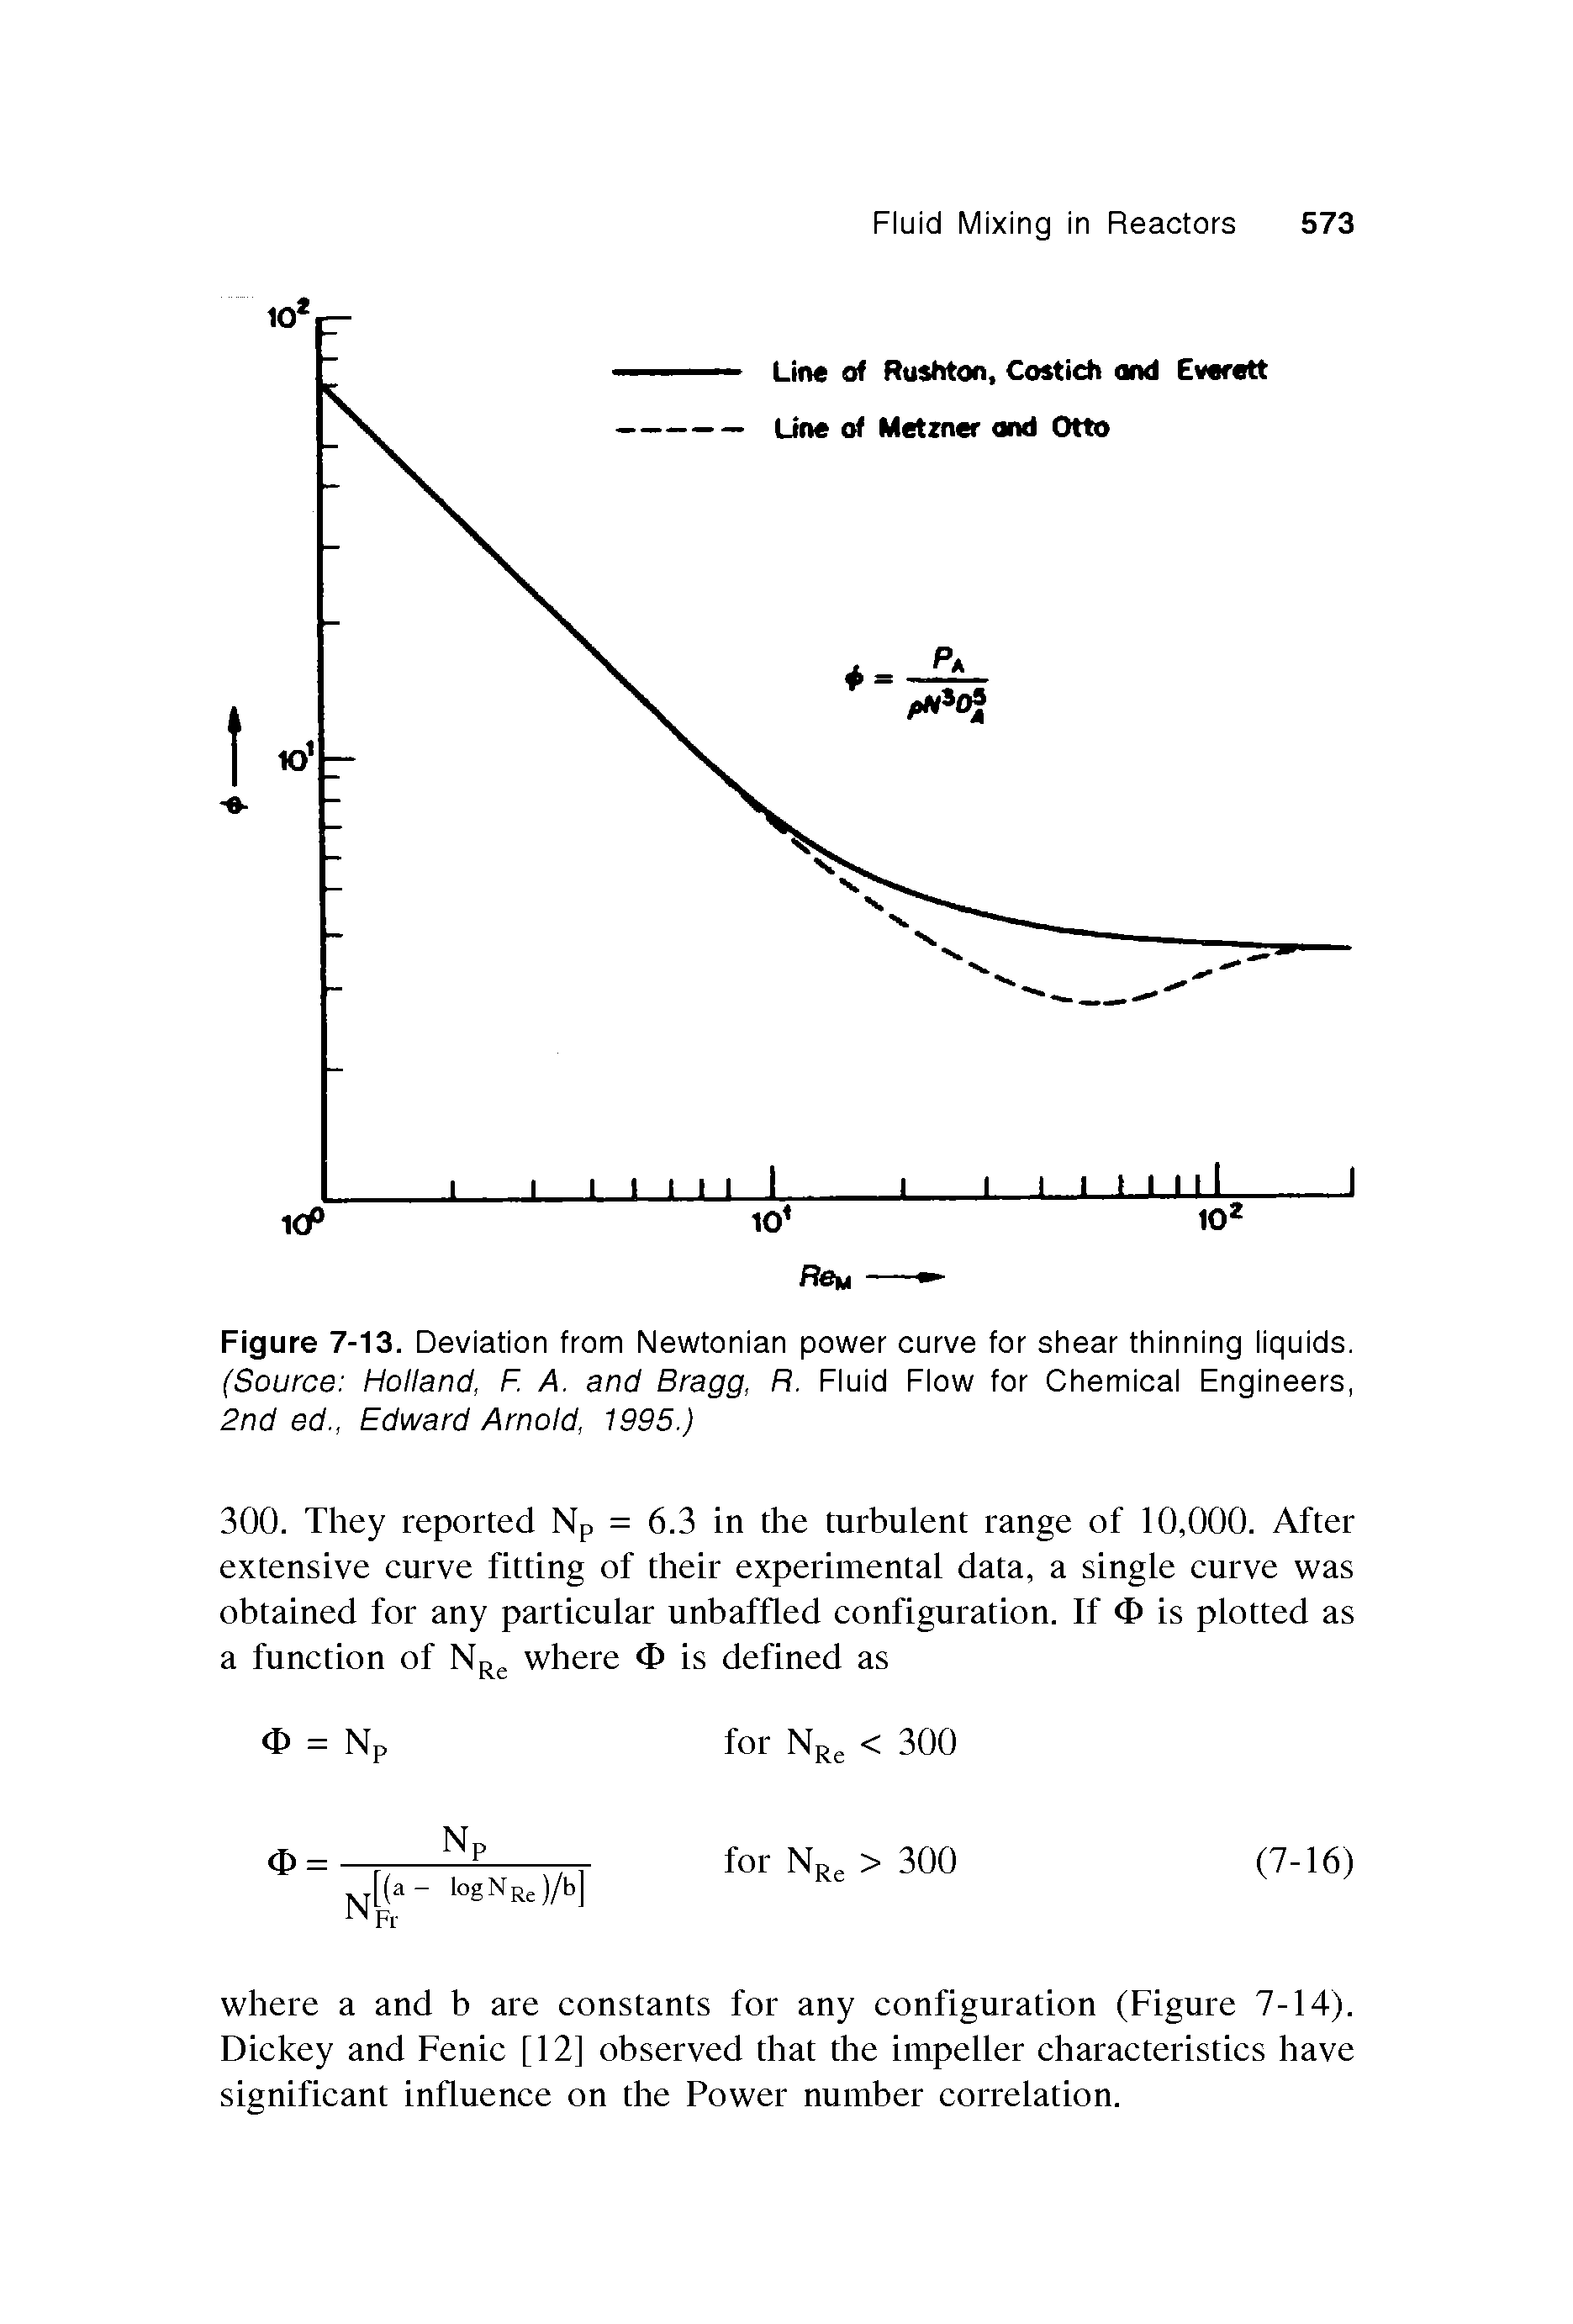 Figure 7-13. Deviation from Newtonian power curve for shear thinning liquids. (Source Holland, F. A. and Bragg, R. Fluid Flow for Chemical Engineers, 2nd ed., Edward Arnold, 1995.)...